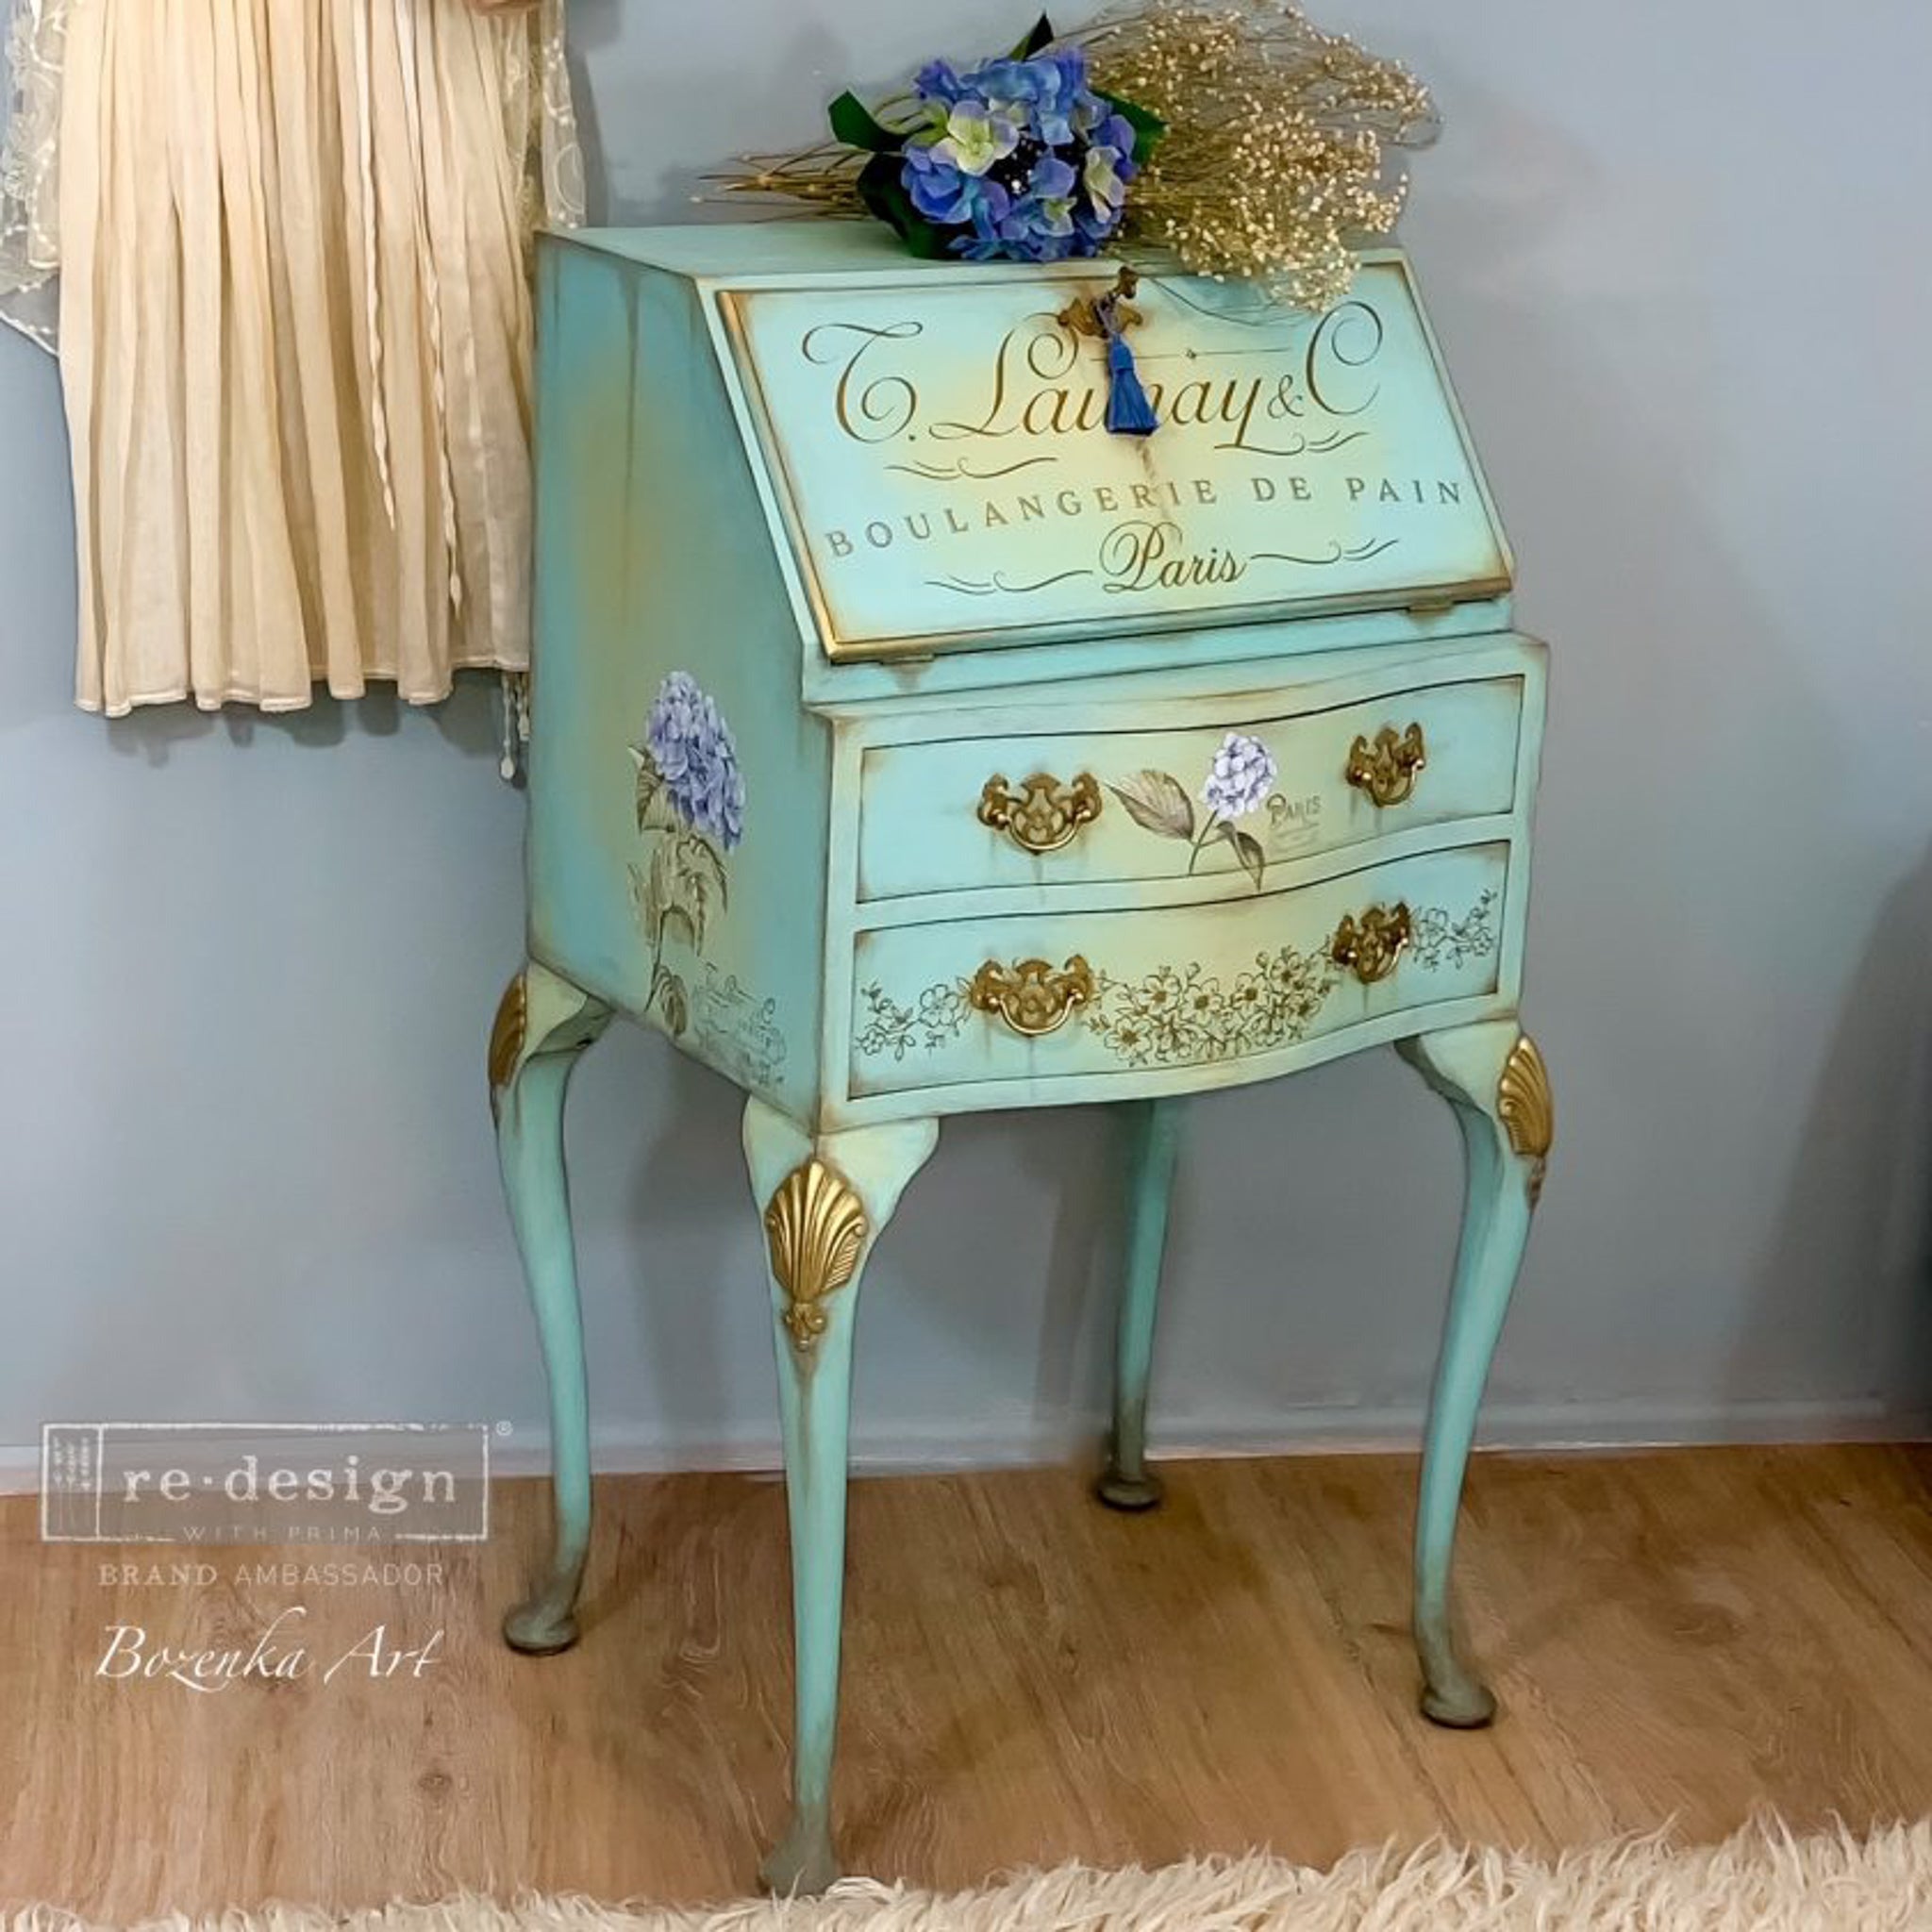 A vintage secretary's desk refurbished by Bozenka Art is painted a blend of light teal and yellow with gold accents and features ReDesign with Prima's Mystic Hydrangea small transfer on it.